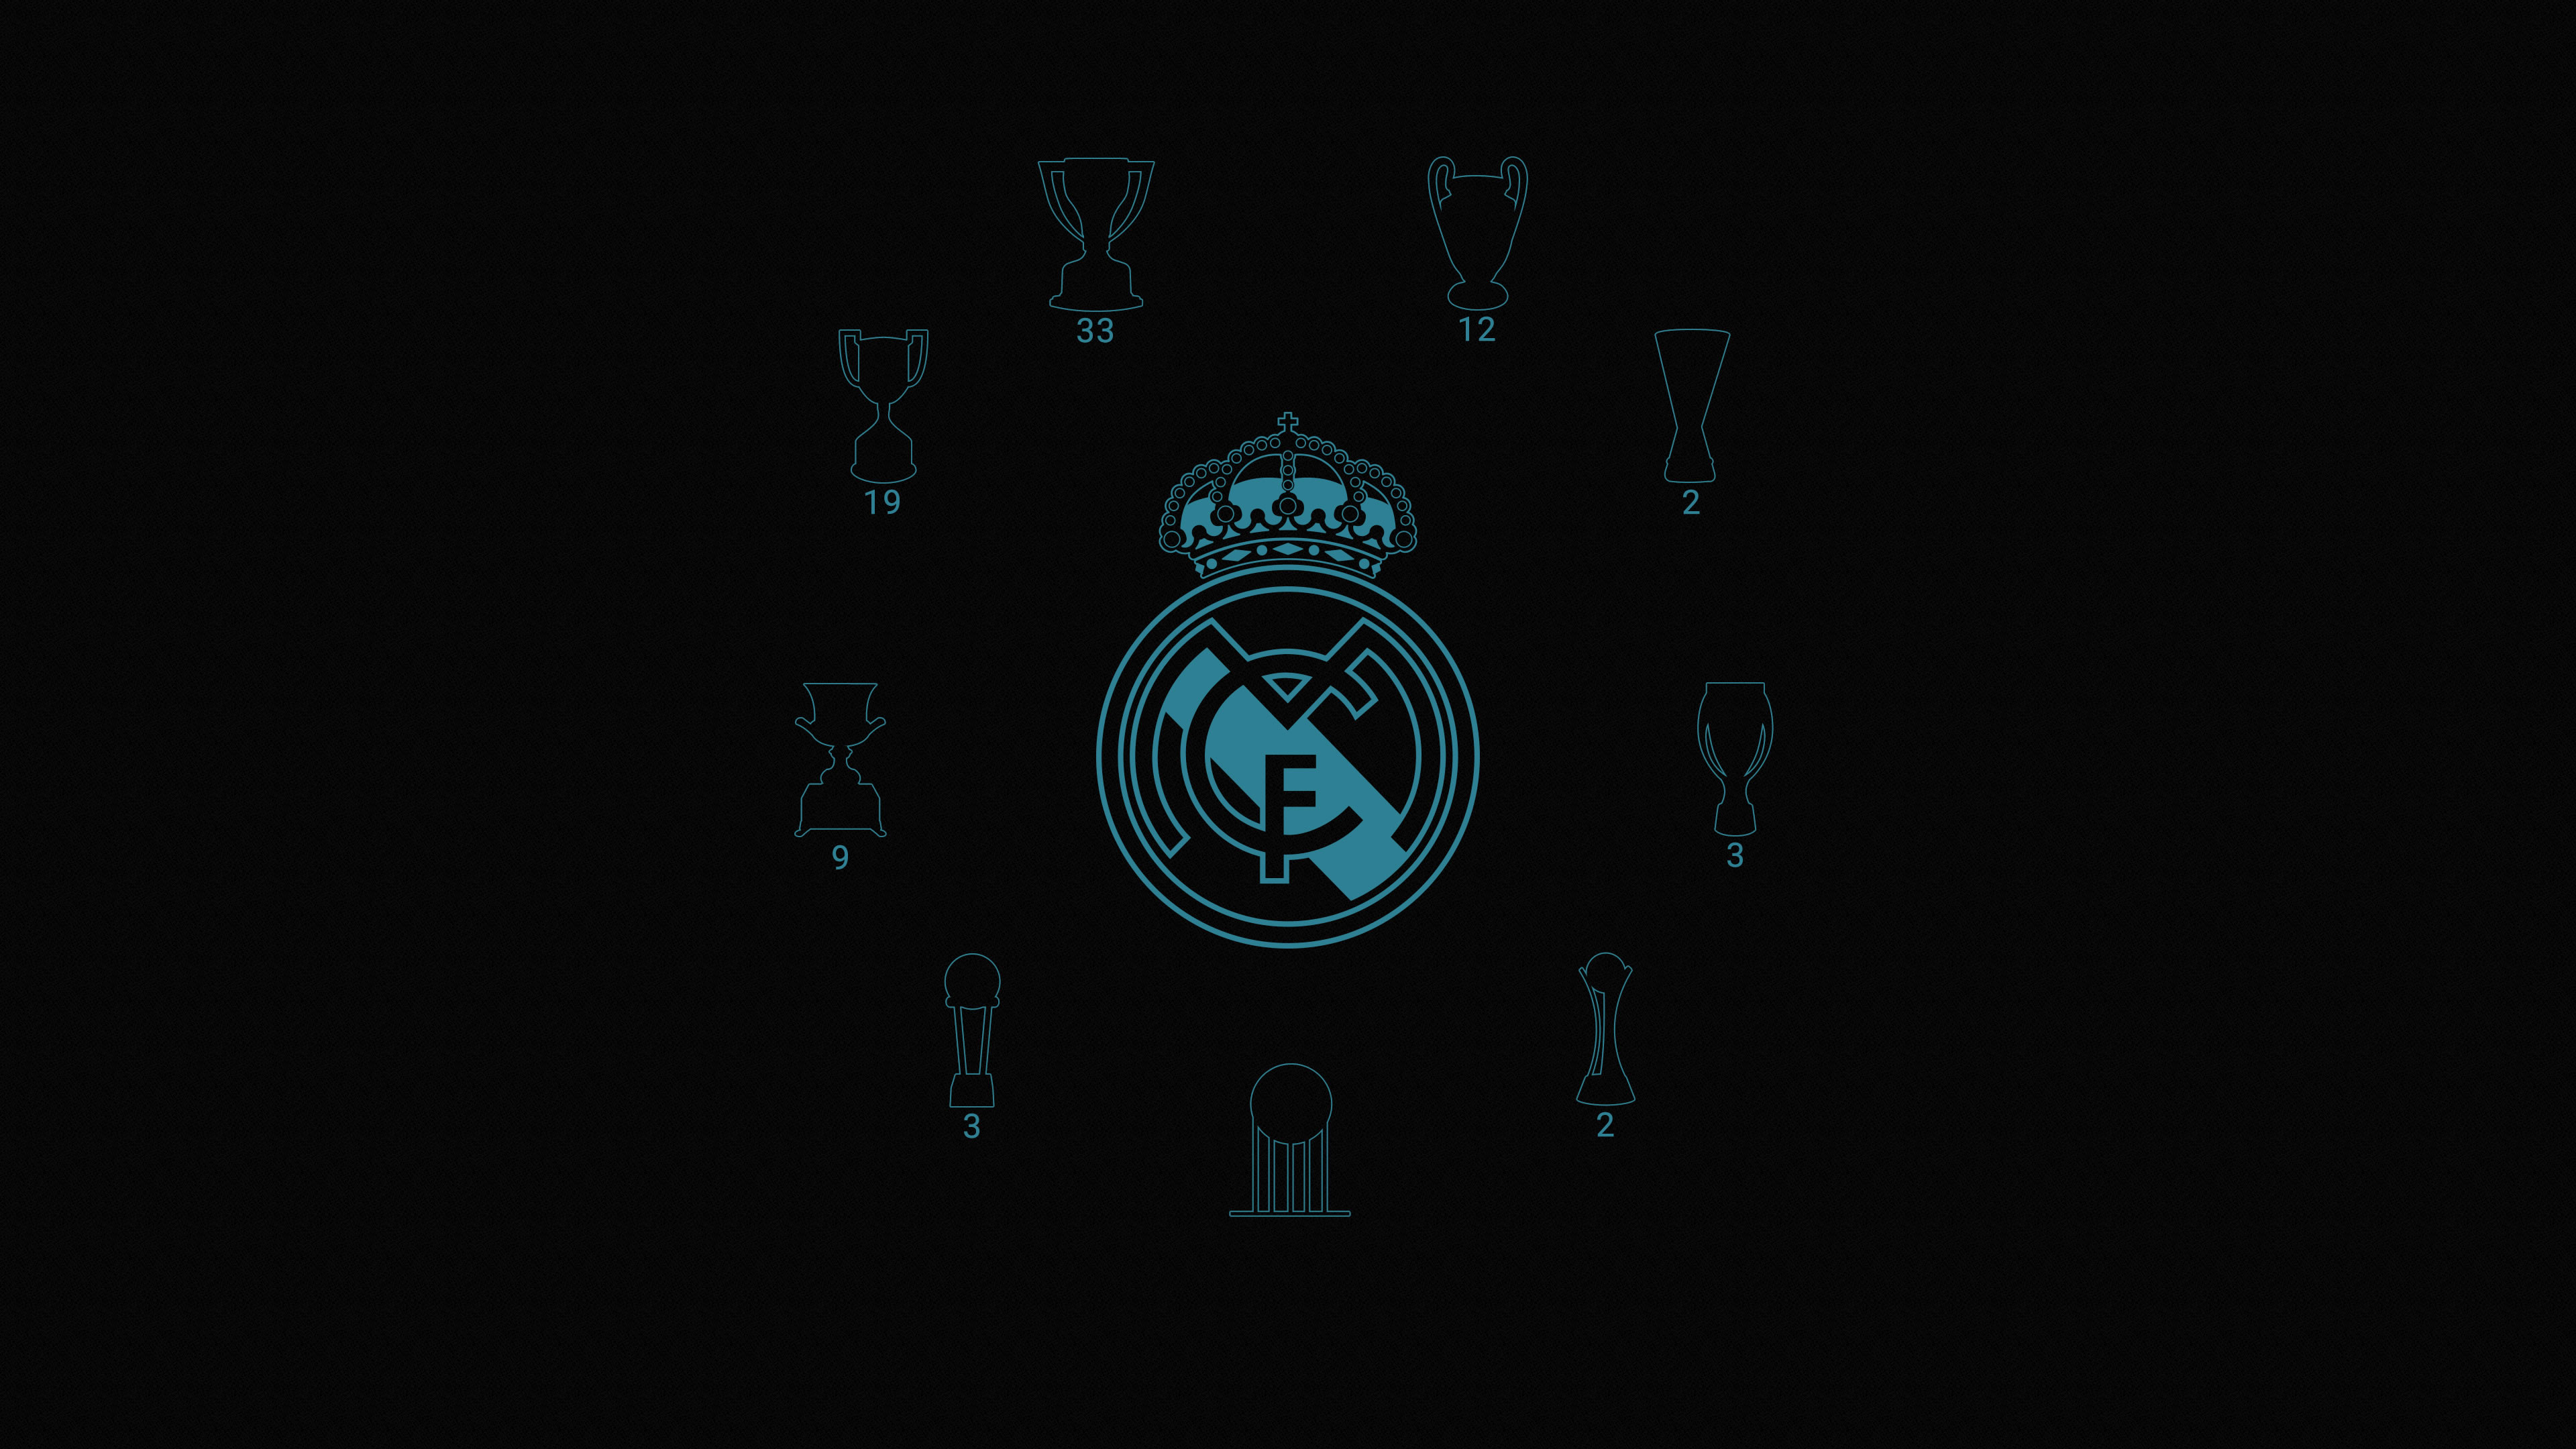 Real Madrid HD Wallpaper 2018 64 Images